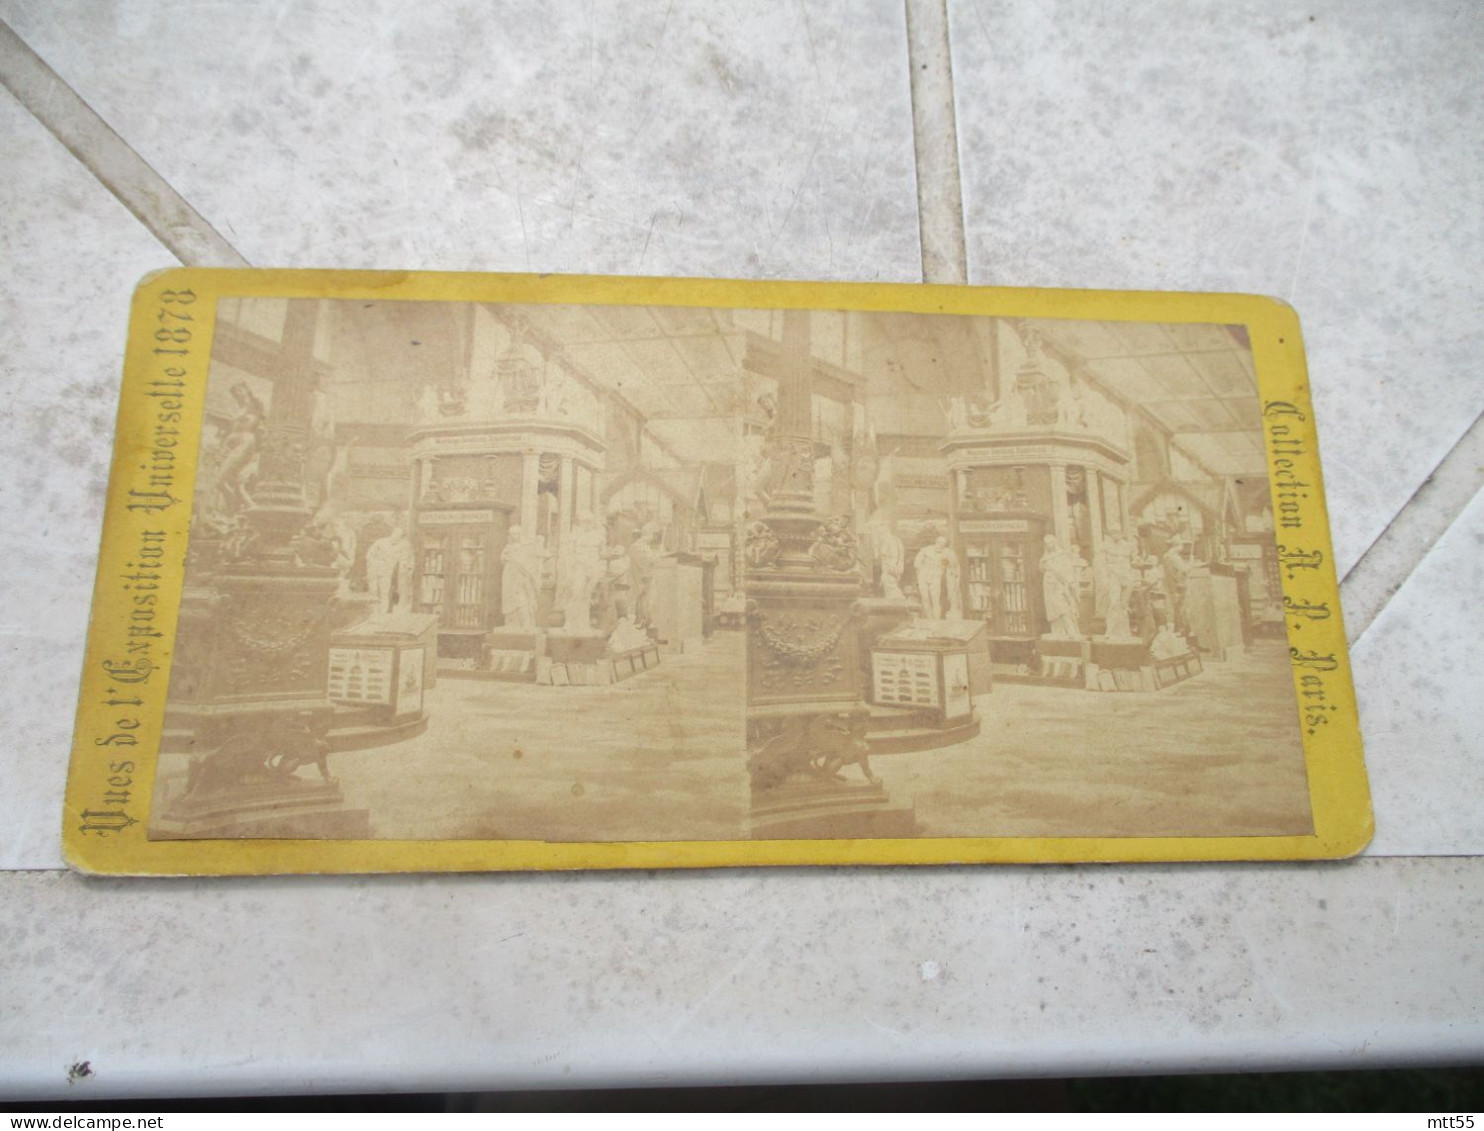 EXPOSITION UNIVERSELLE 1878 SECTION CERAMIQUE AUTRICHE PHOTO STEREO - Stereo-Photographie